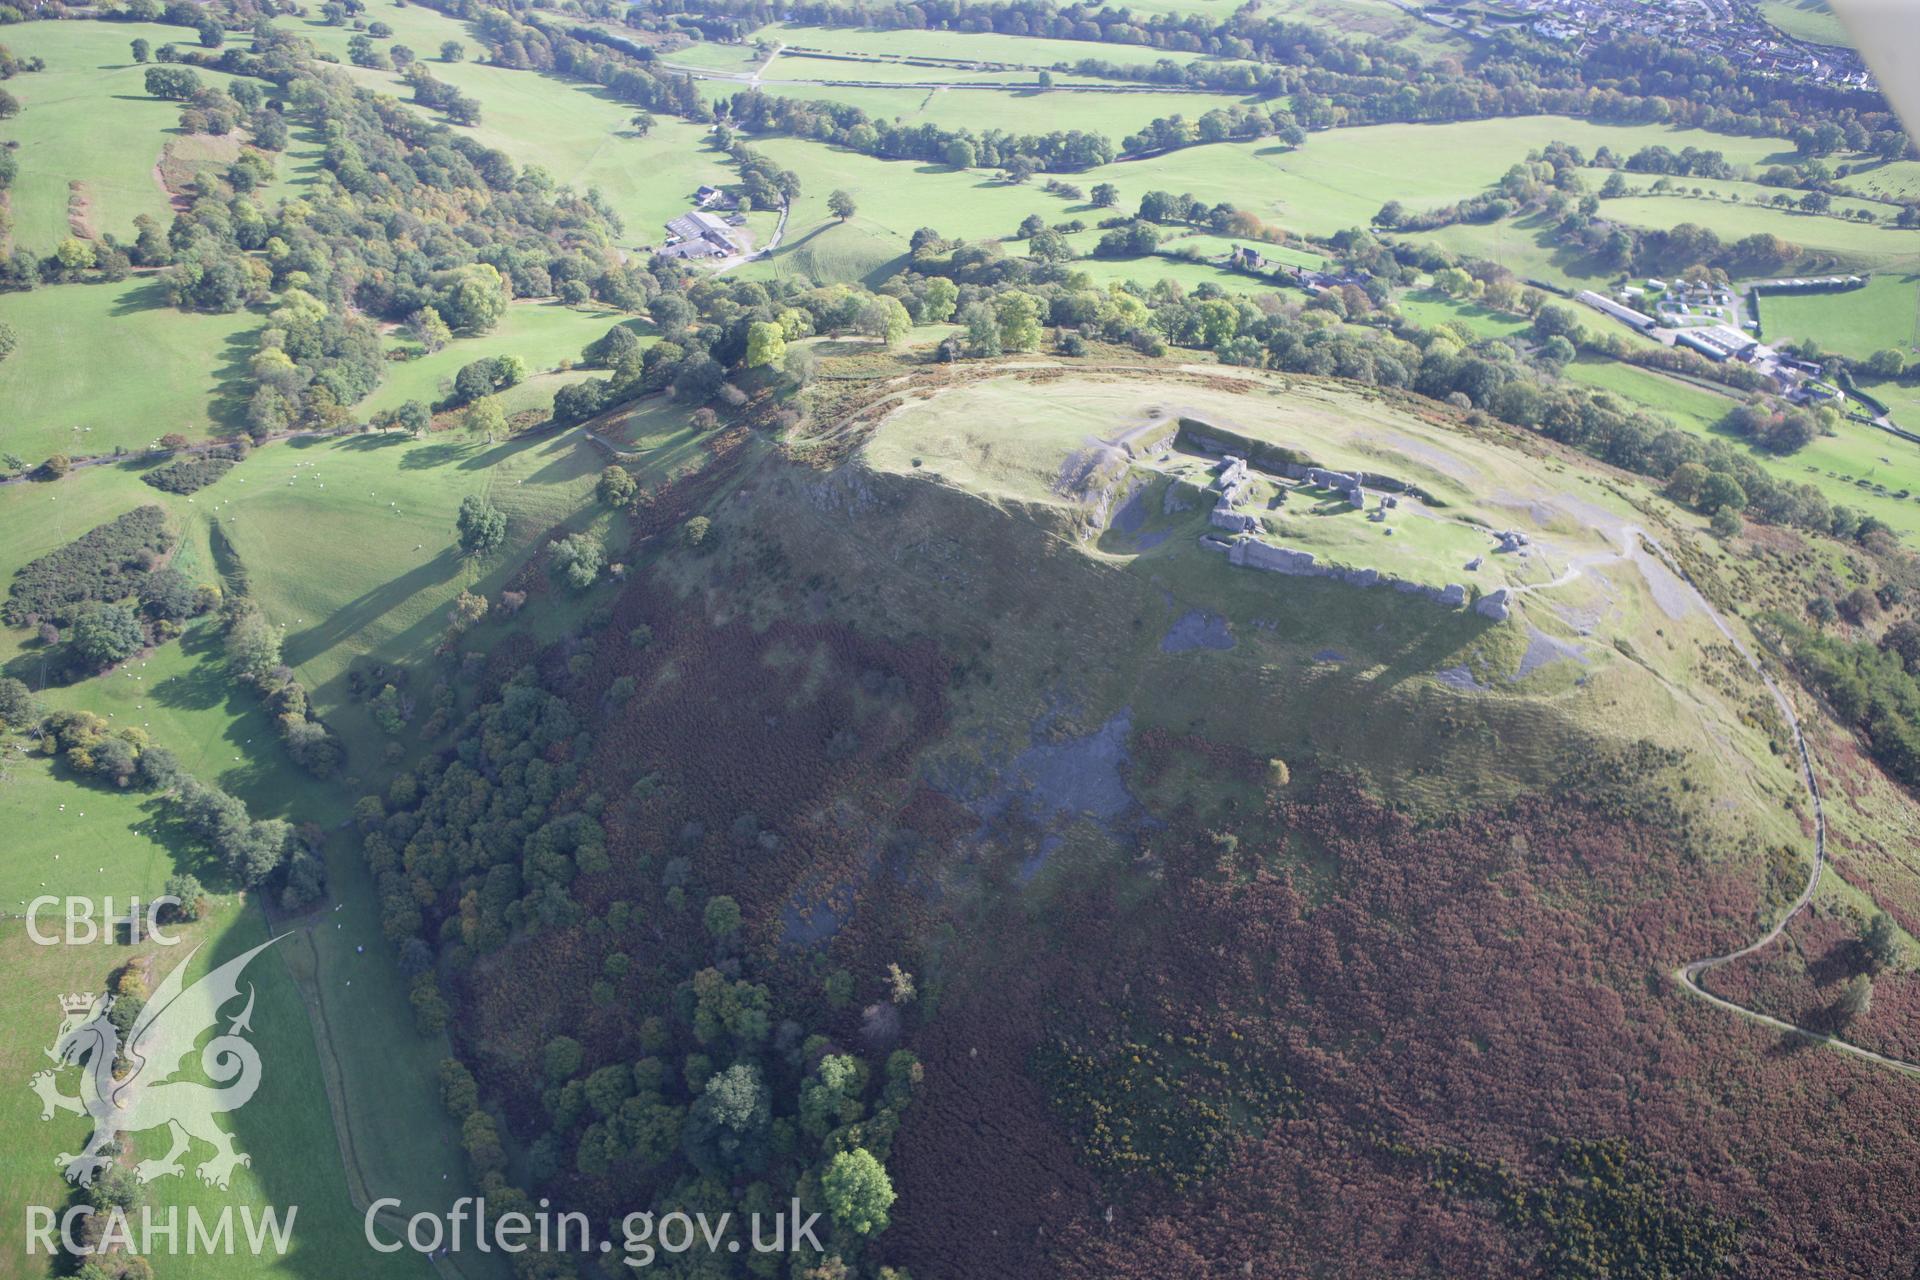 RCAHMW colour oblique aerial photograph of Castell Dinas Bran. Taken on 13 October 2009 by Toby Driver